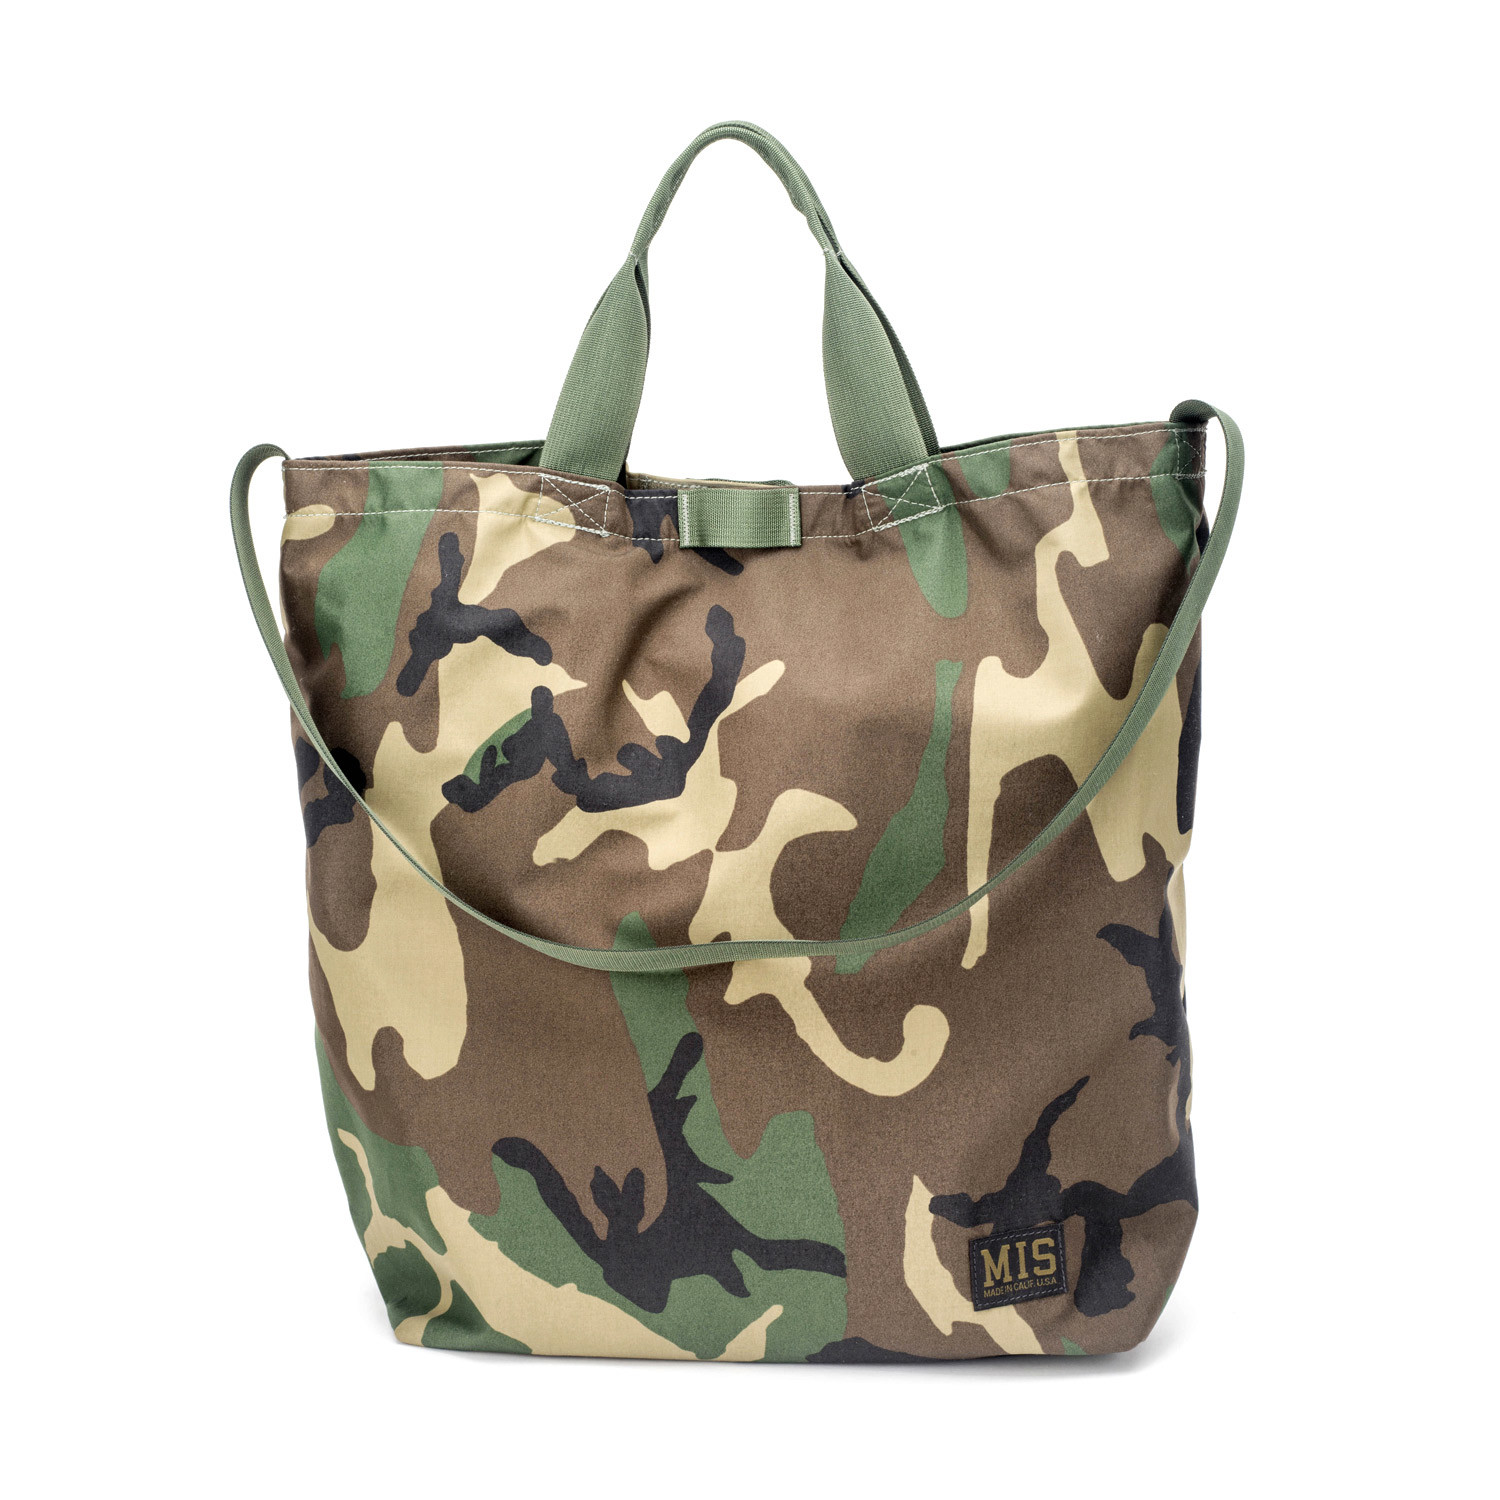 Waterproof Carrying Bag (Woodland Camo) - MIS - Touch of Modern